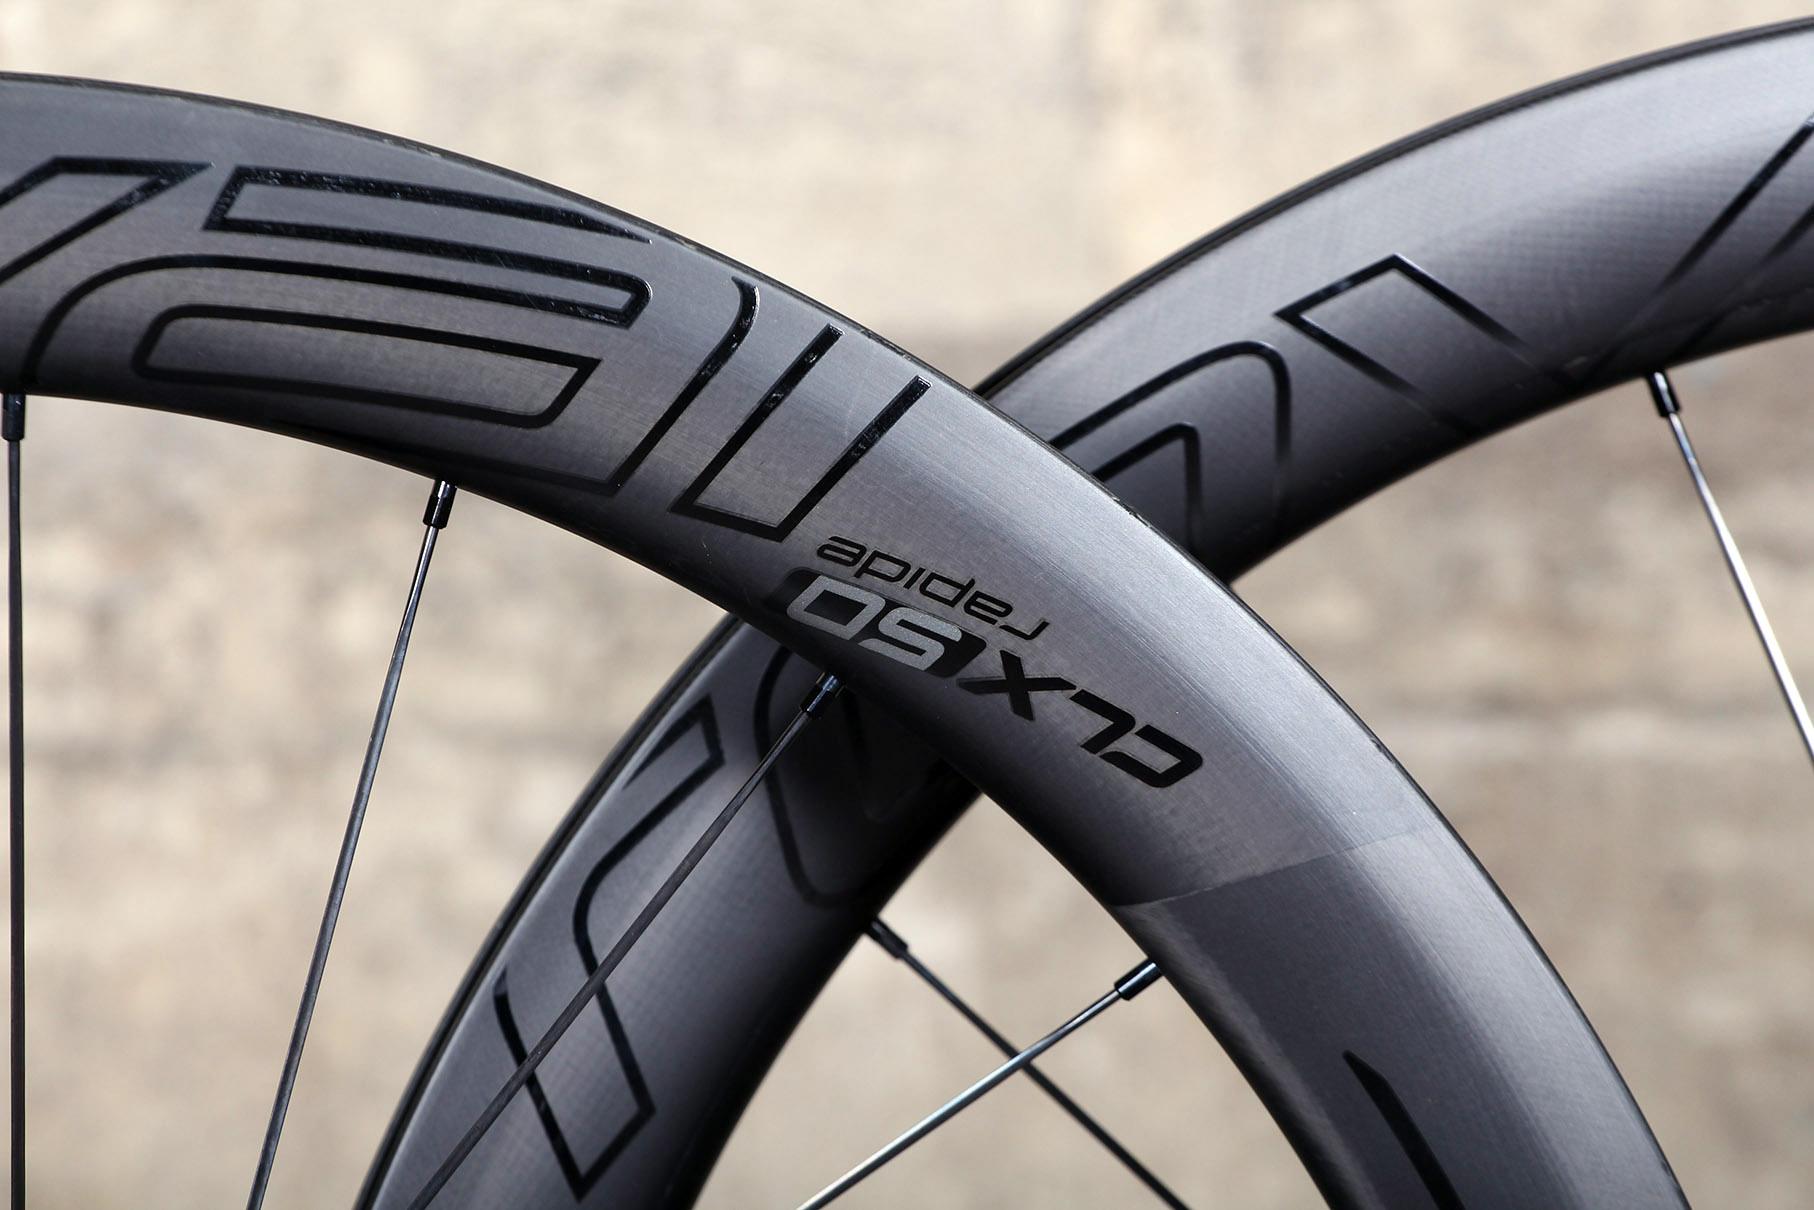 specialized roval cl 50 disc wheelset